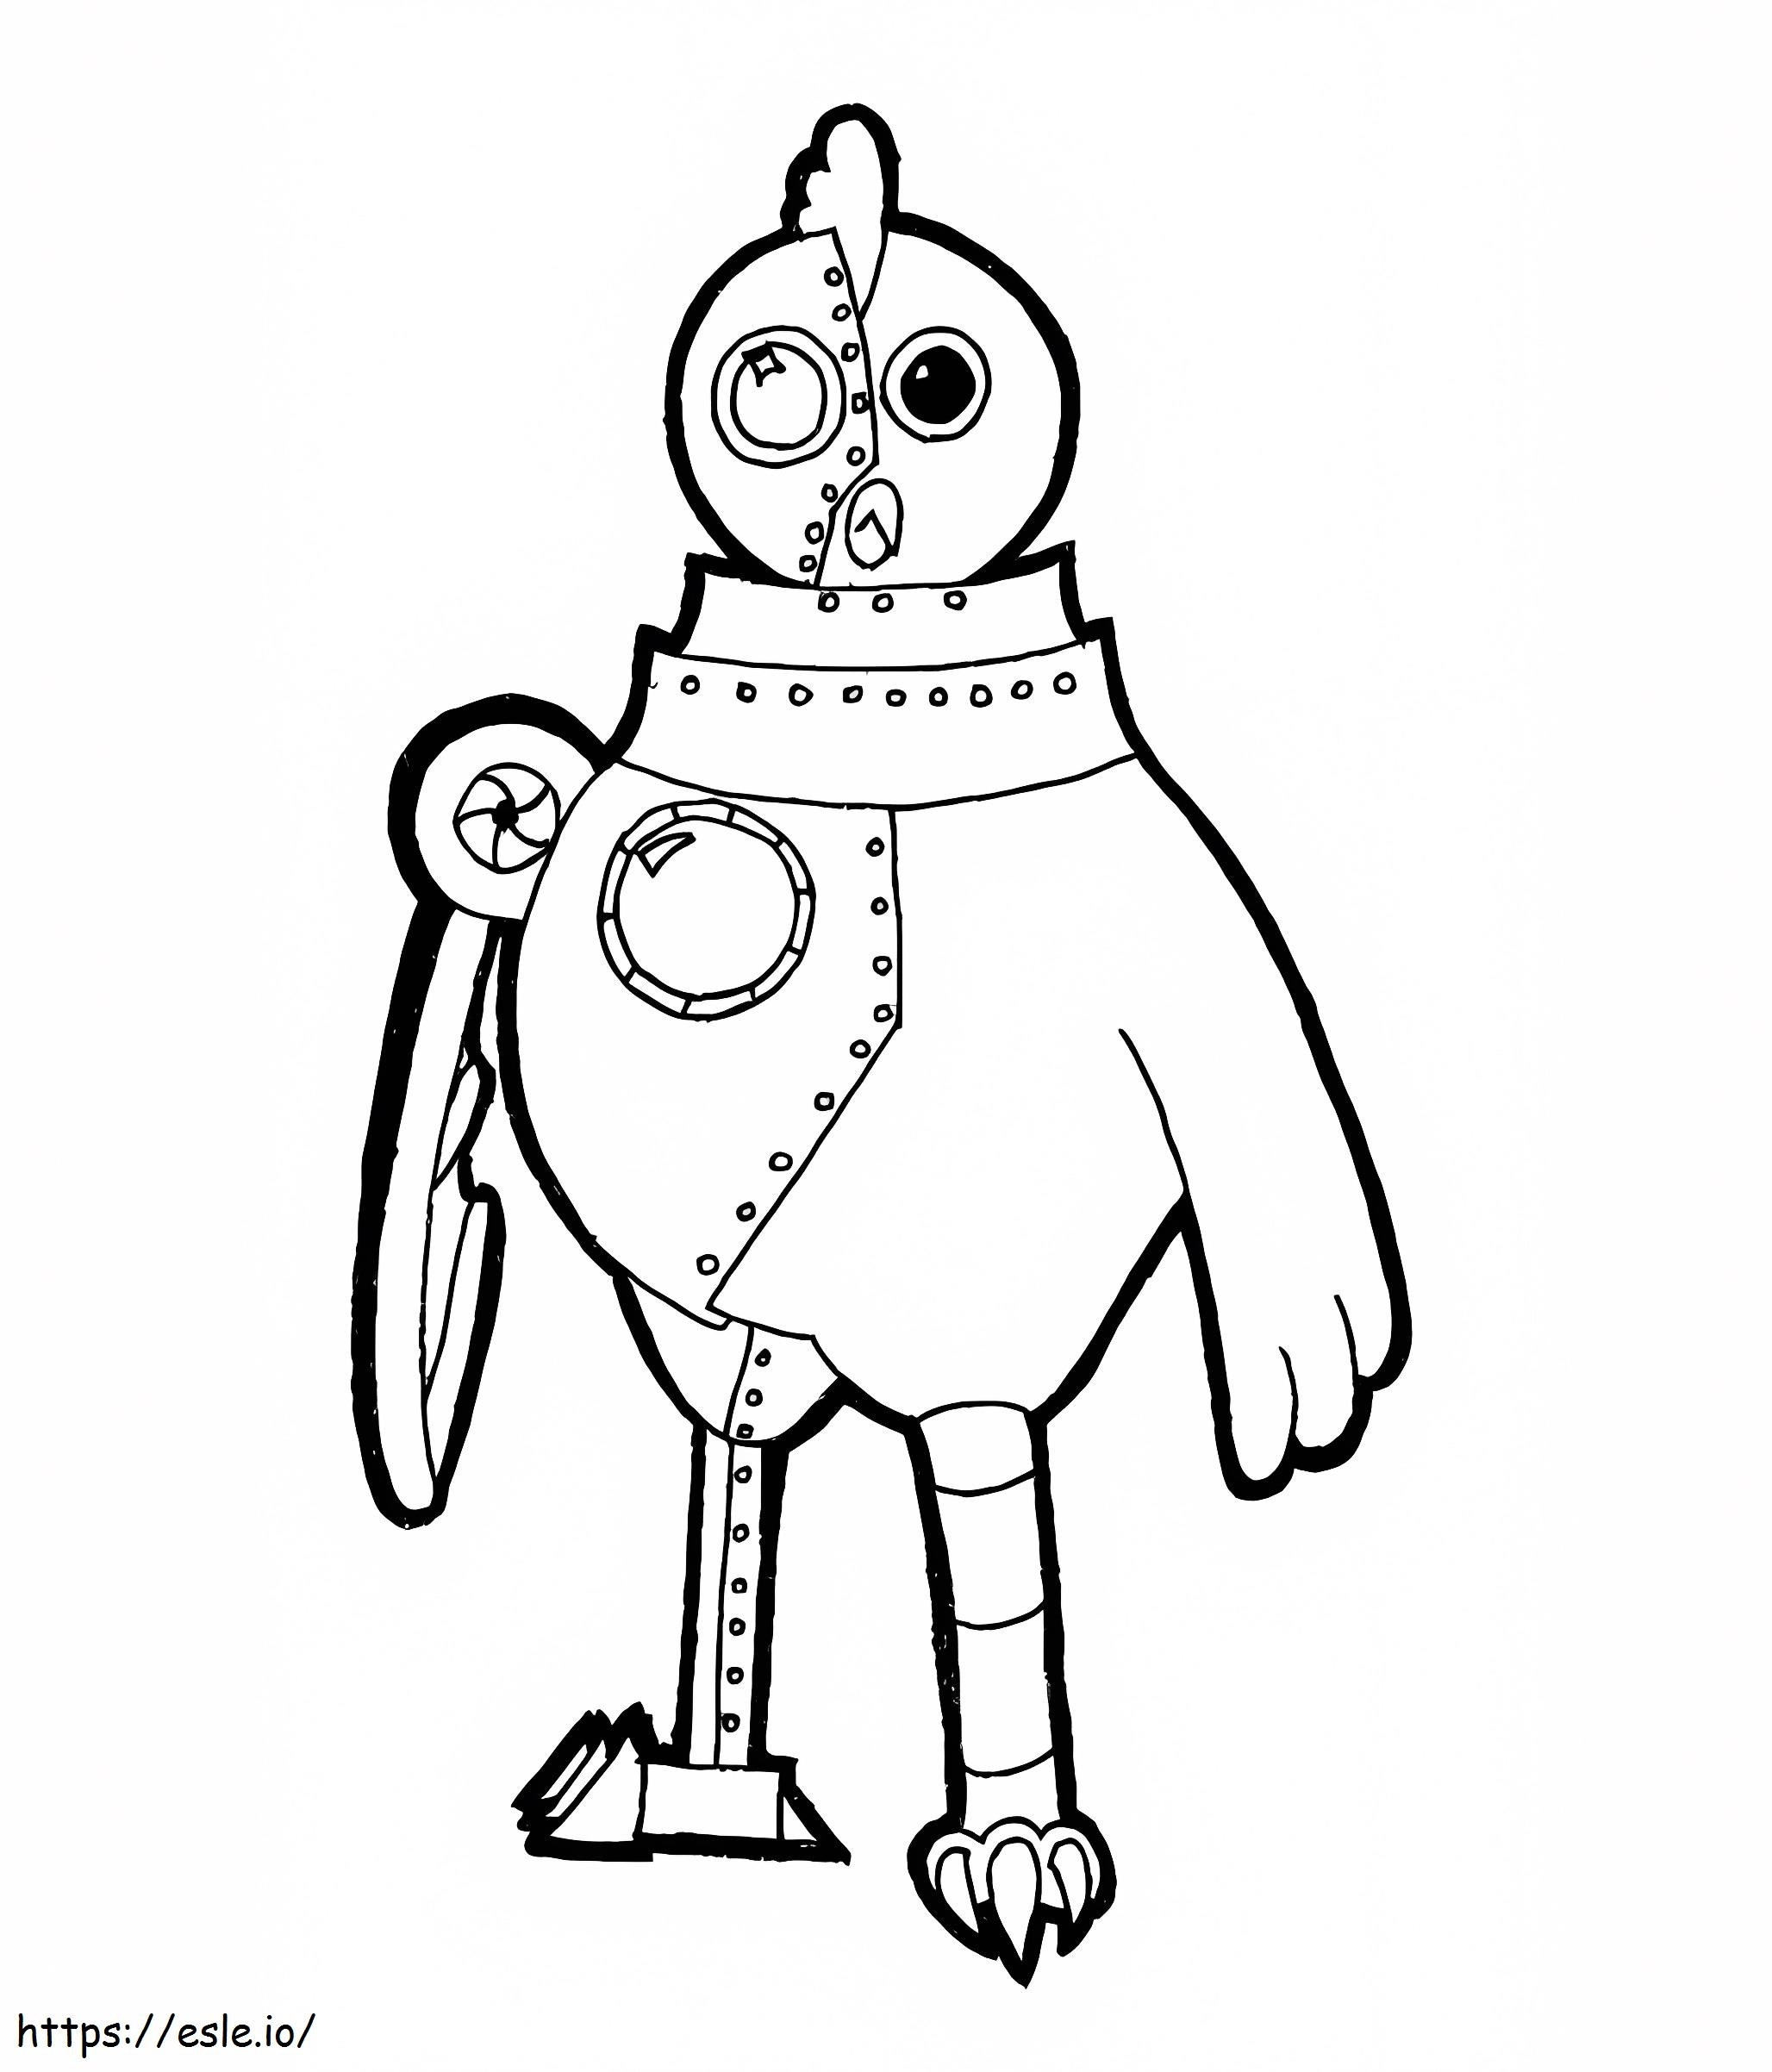 Robot Chicken 2 coloring page